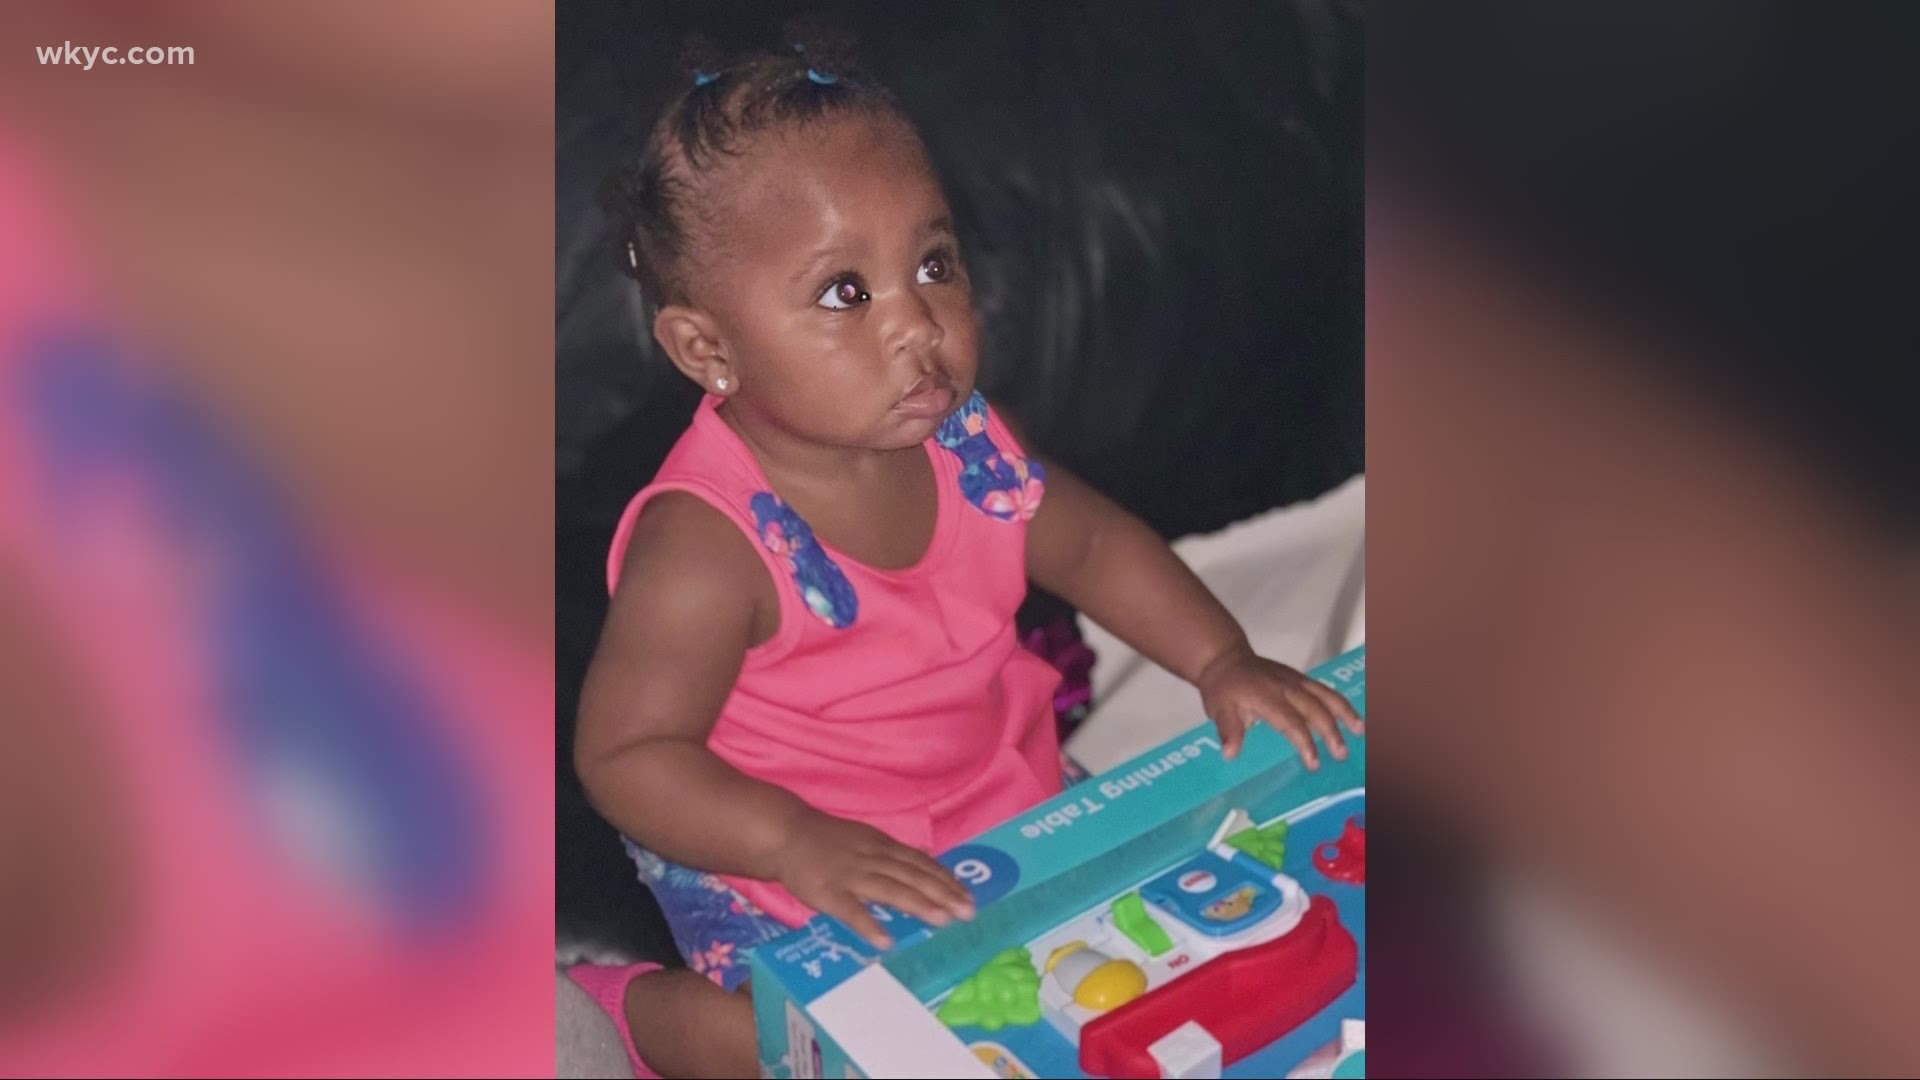 Family members say they were never satisfied by the county taking custody or placing Mandisa Sizemore in foster care. Brandon Simmons reports.